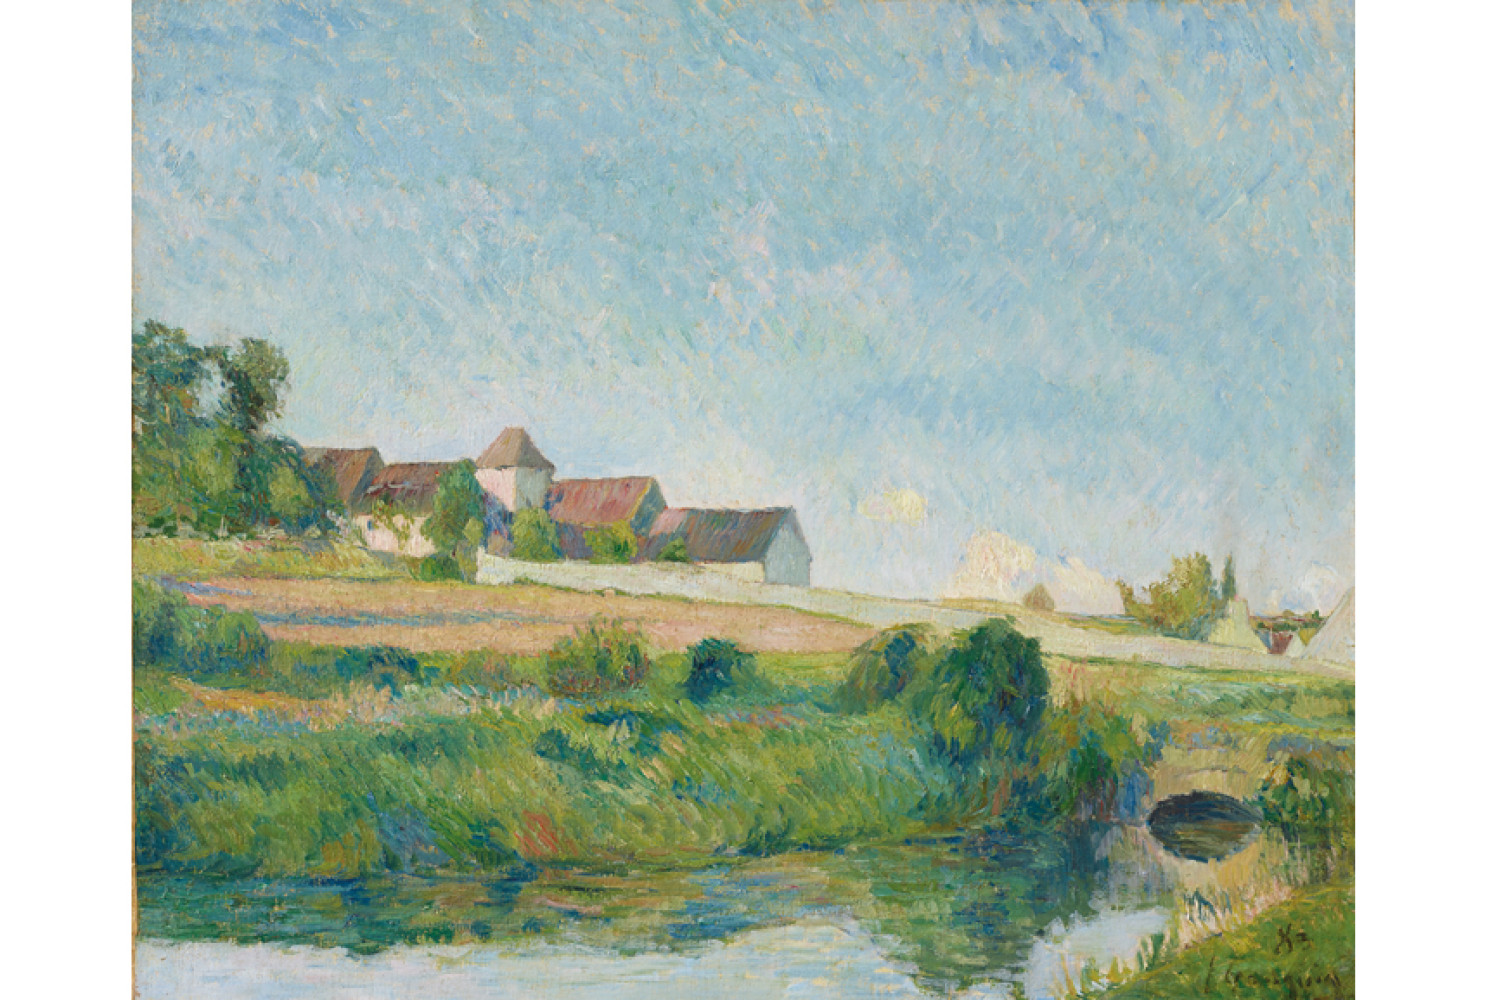 La ferme de la Groue à Osny, 1883, by Paul Gauguin (French, 1840-1903). Oil on canvas,
15 x 18 1/4 inches. Loan courtesy of a private collection.
